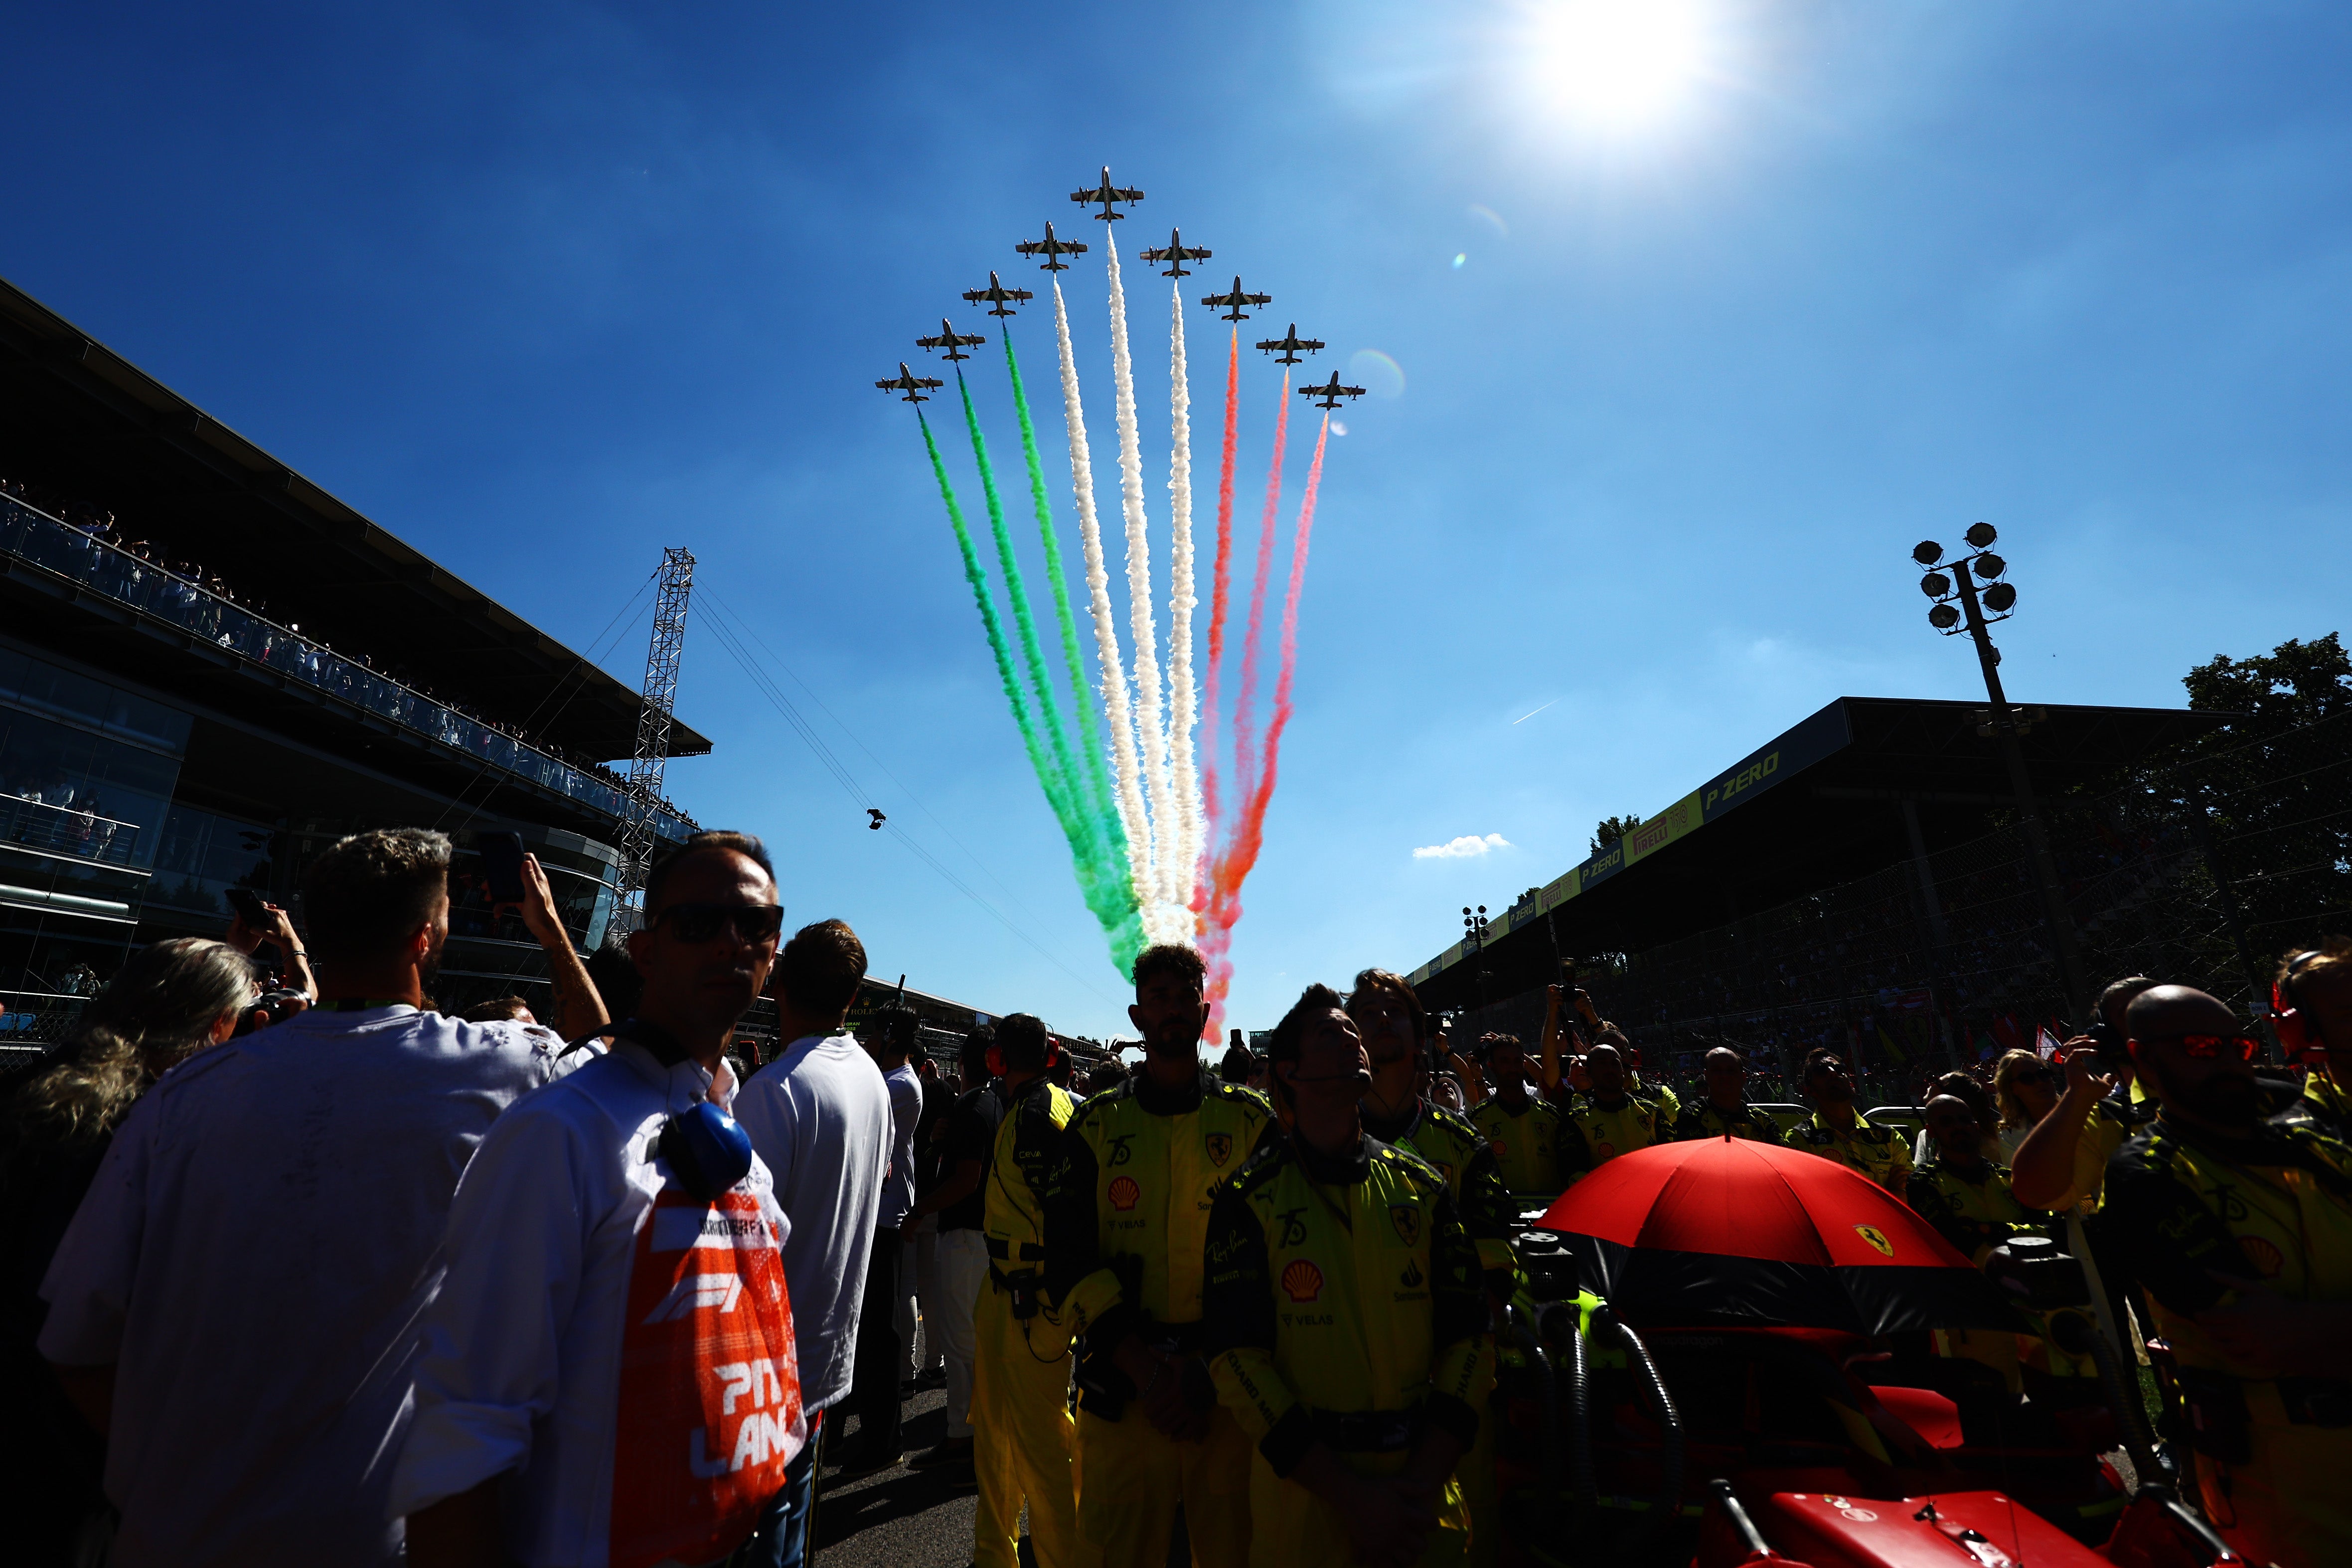 Two flybys took place prior to the Italian Grand Prix